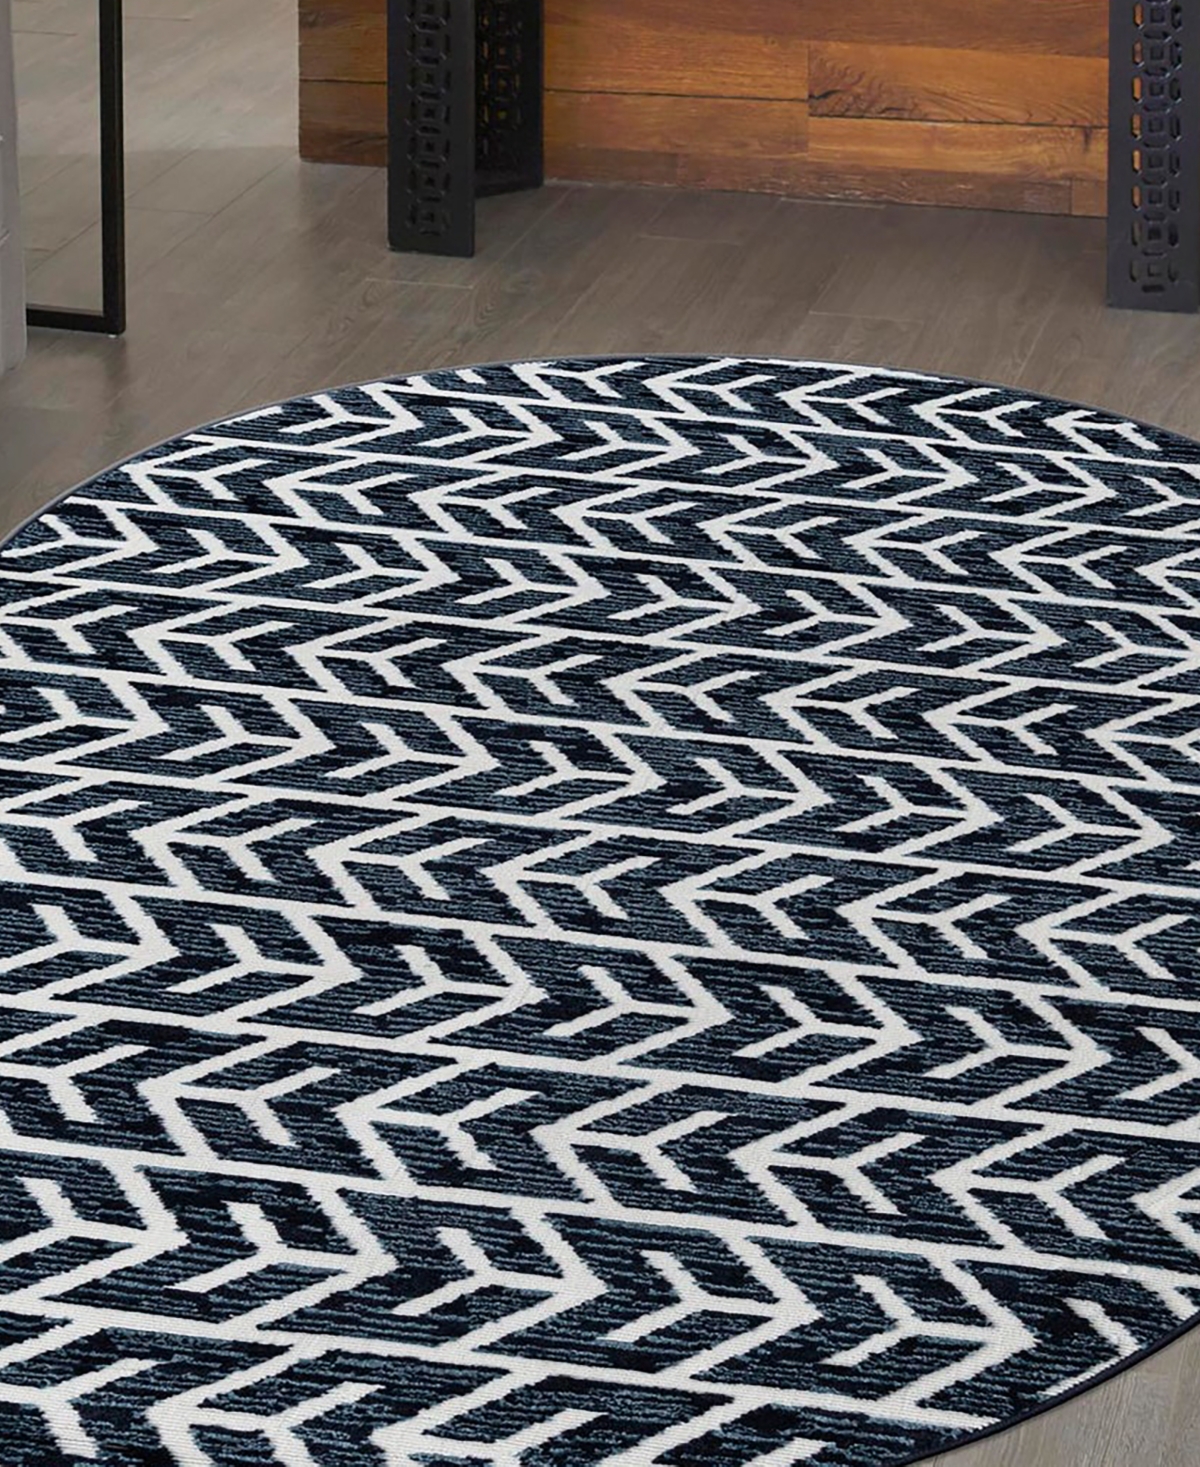 Shop Sabrina Soto Outdoor Sso003 5' X 8' Oval Area Rug In Navy